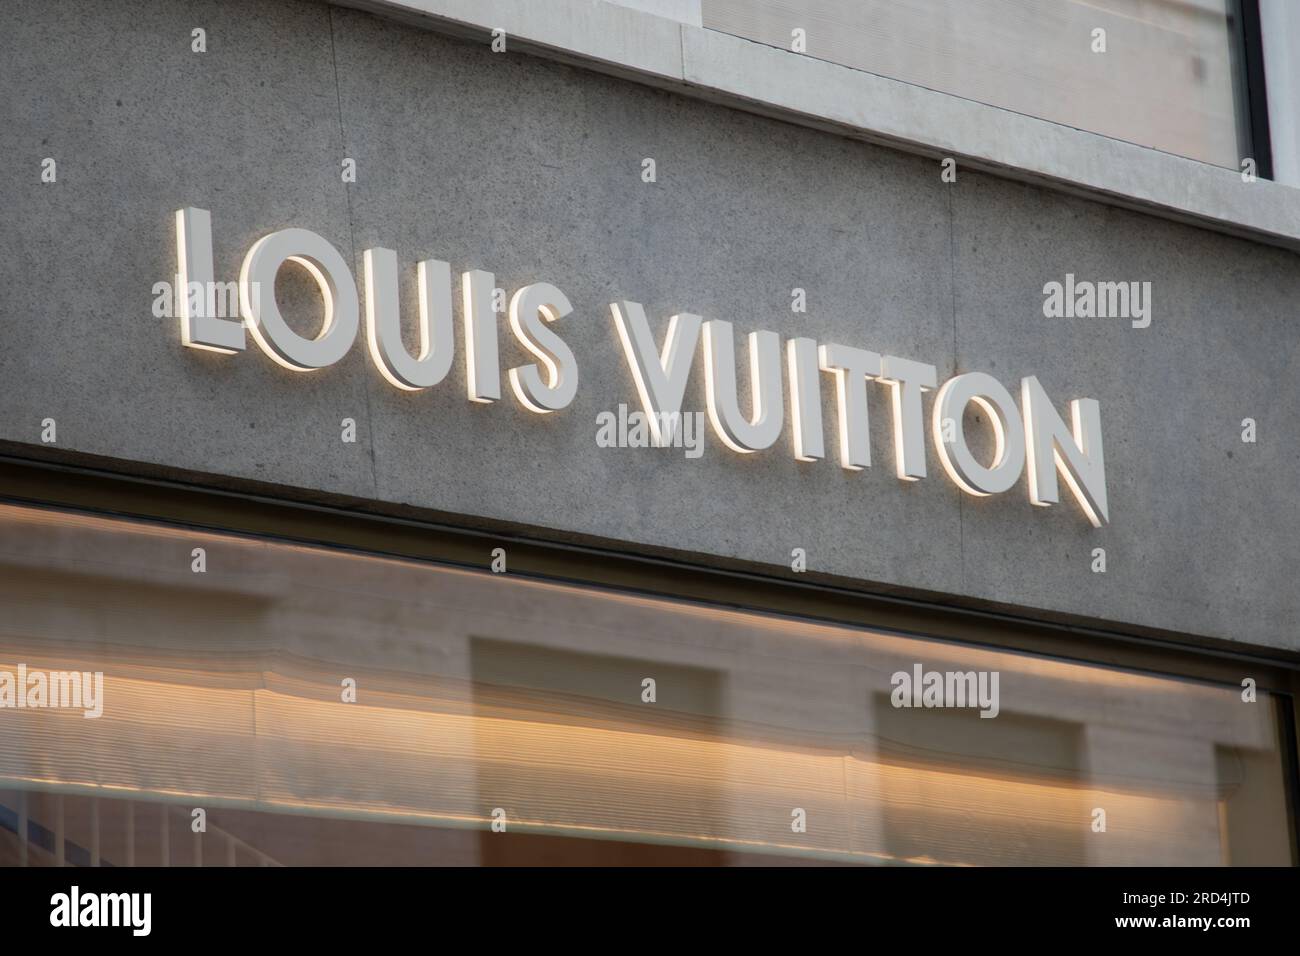 Milan , Italy  - 07 10 2023 : louis vuitton logo and sign text facade entrance chain store brand shop in street view Stock Photo